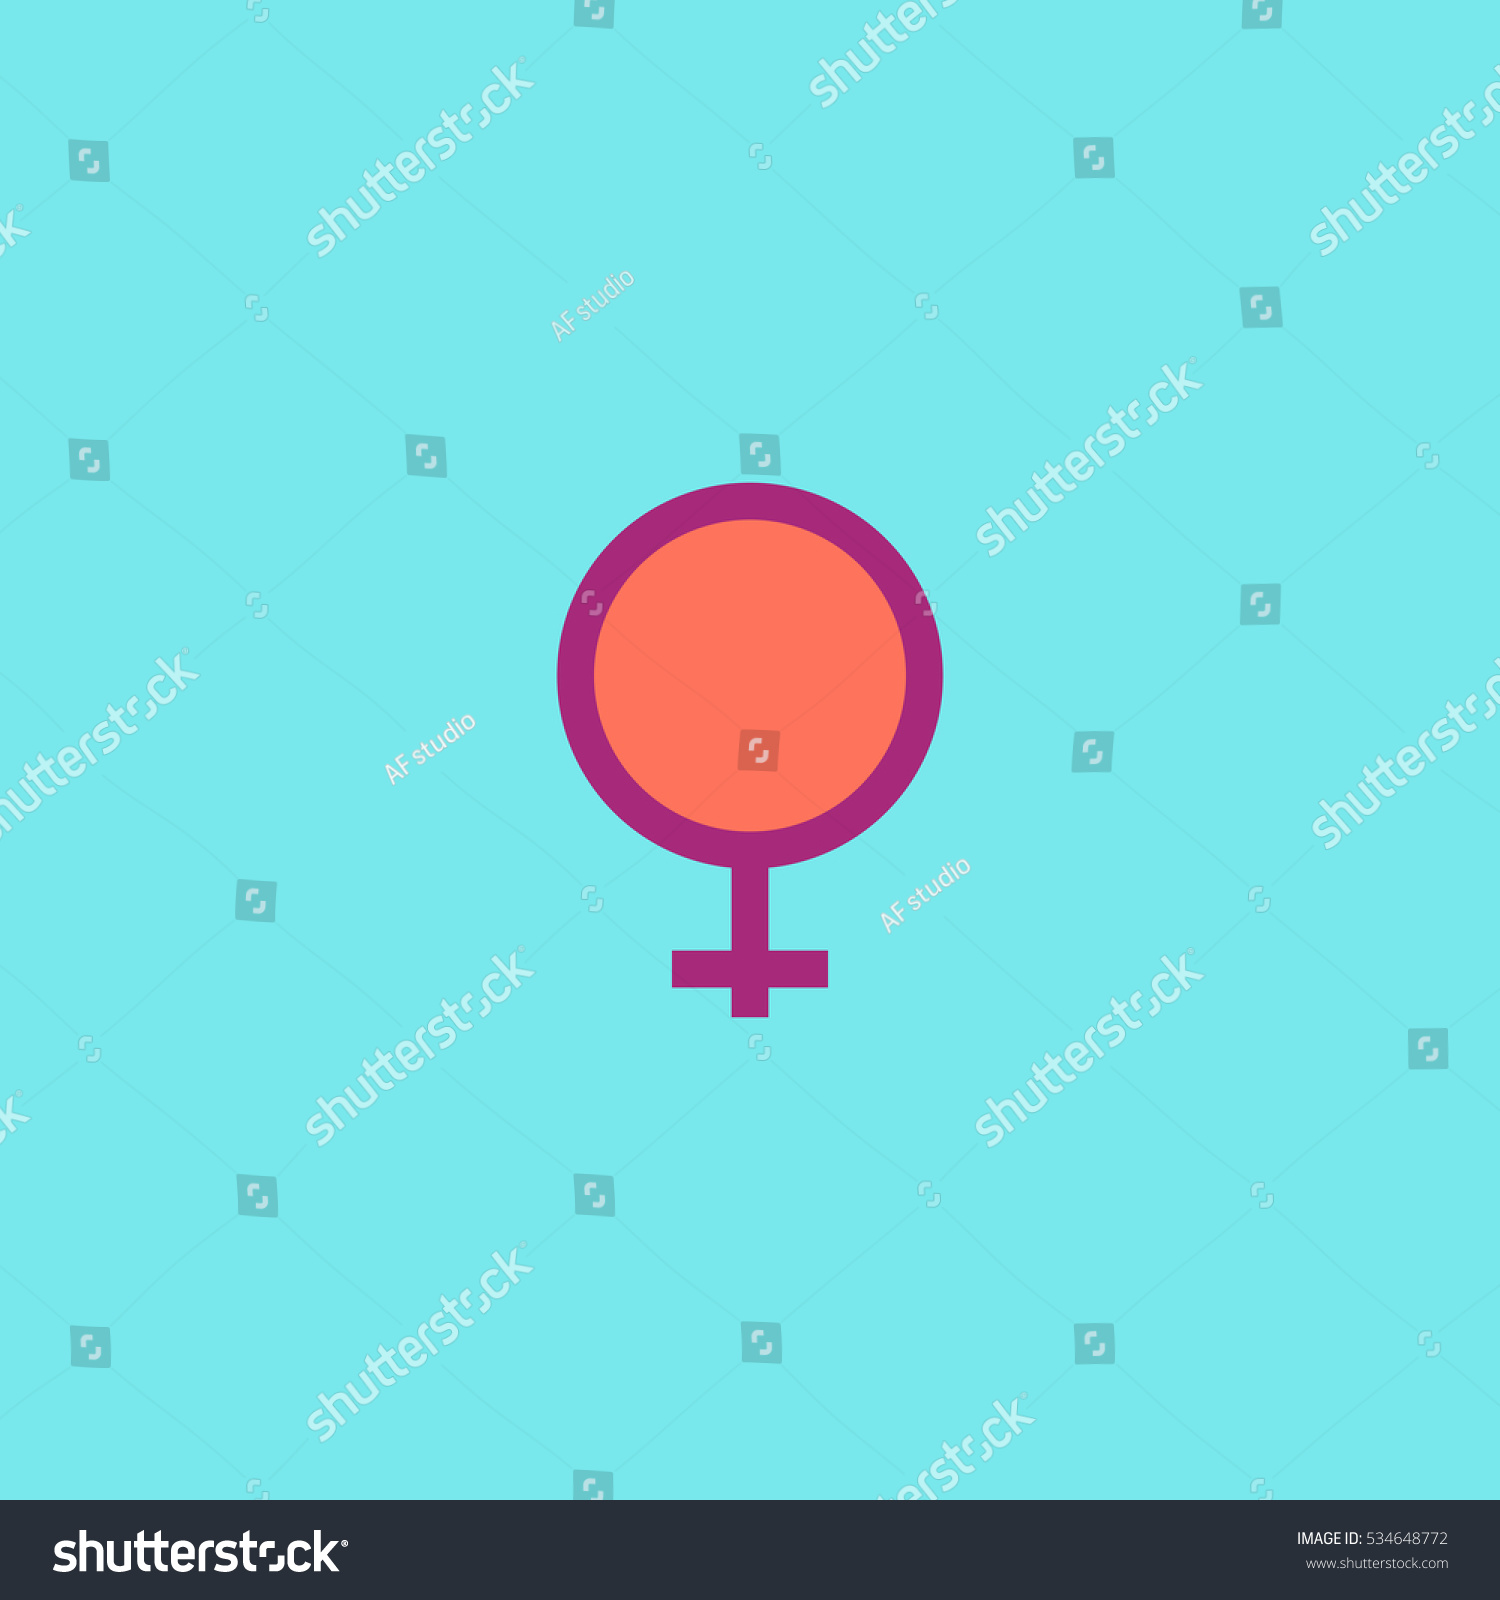 Female Sex Icon Simple Vector Color Stock Vector Royalty Free 534648772 Shutterstock 3760